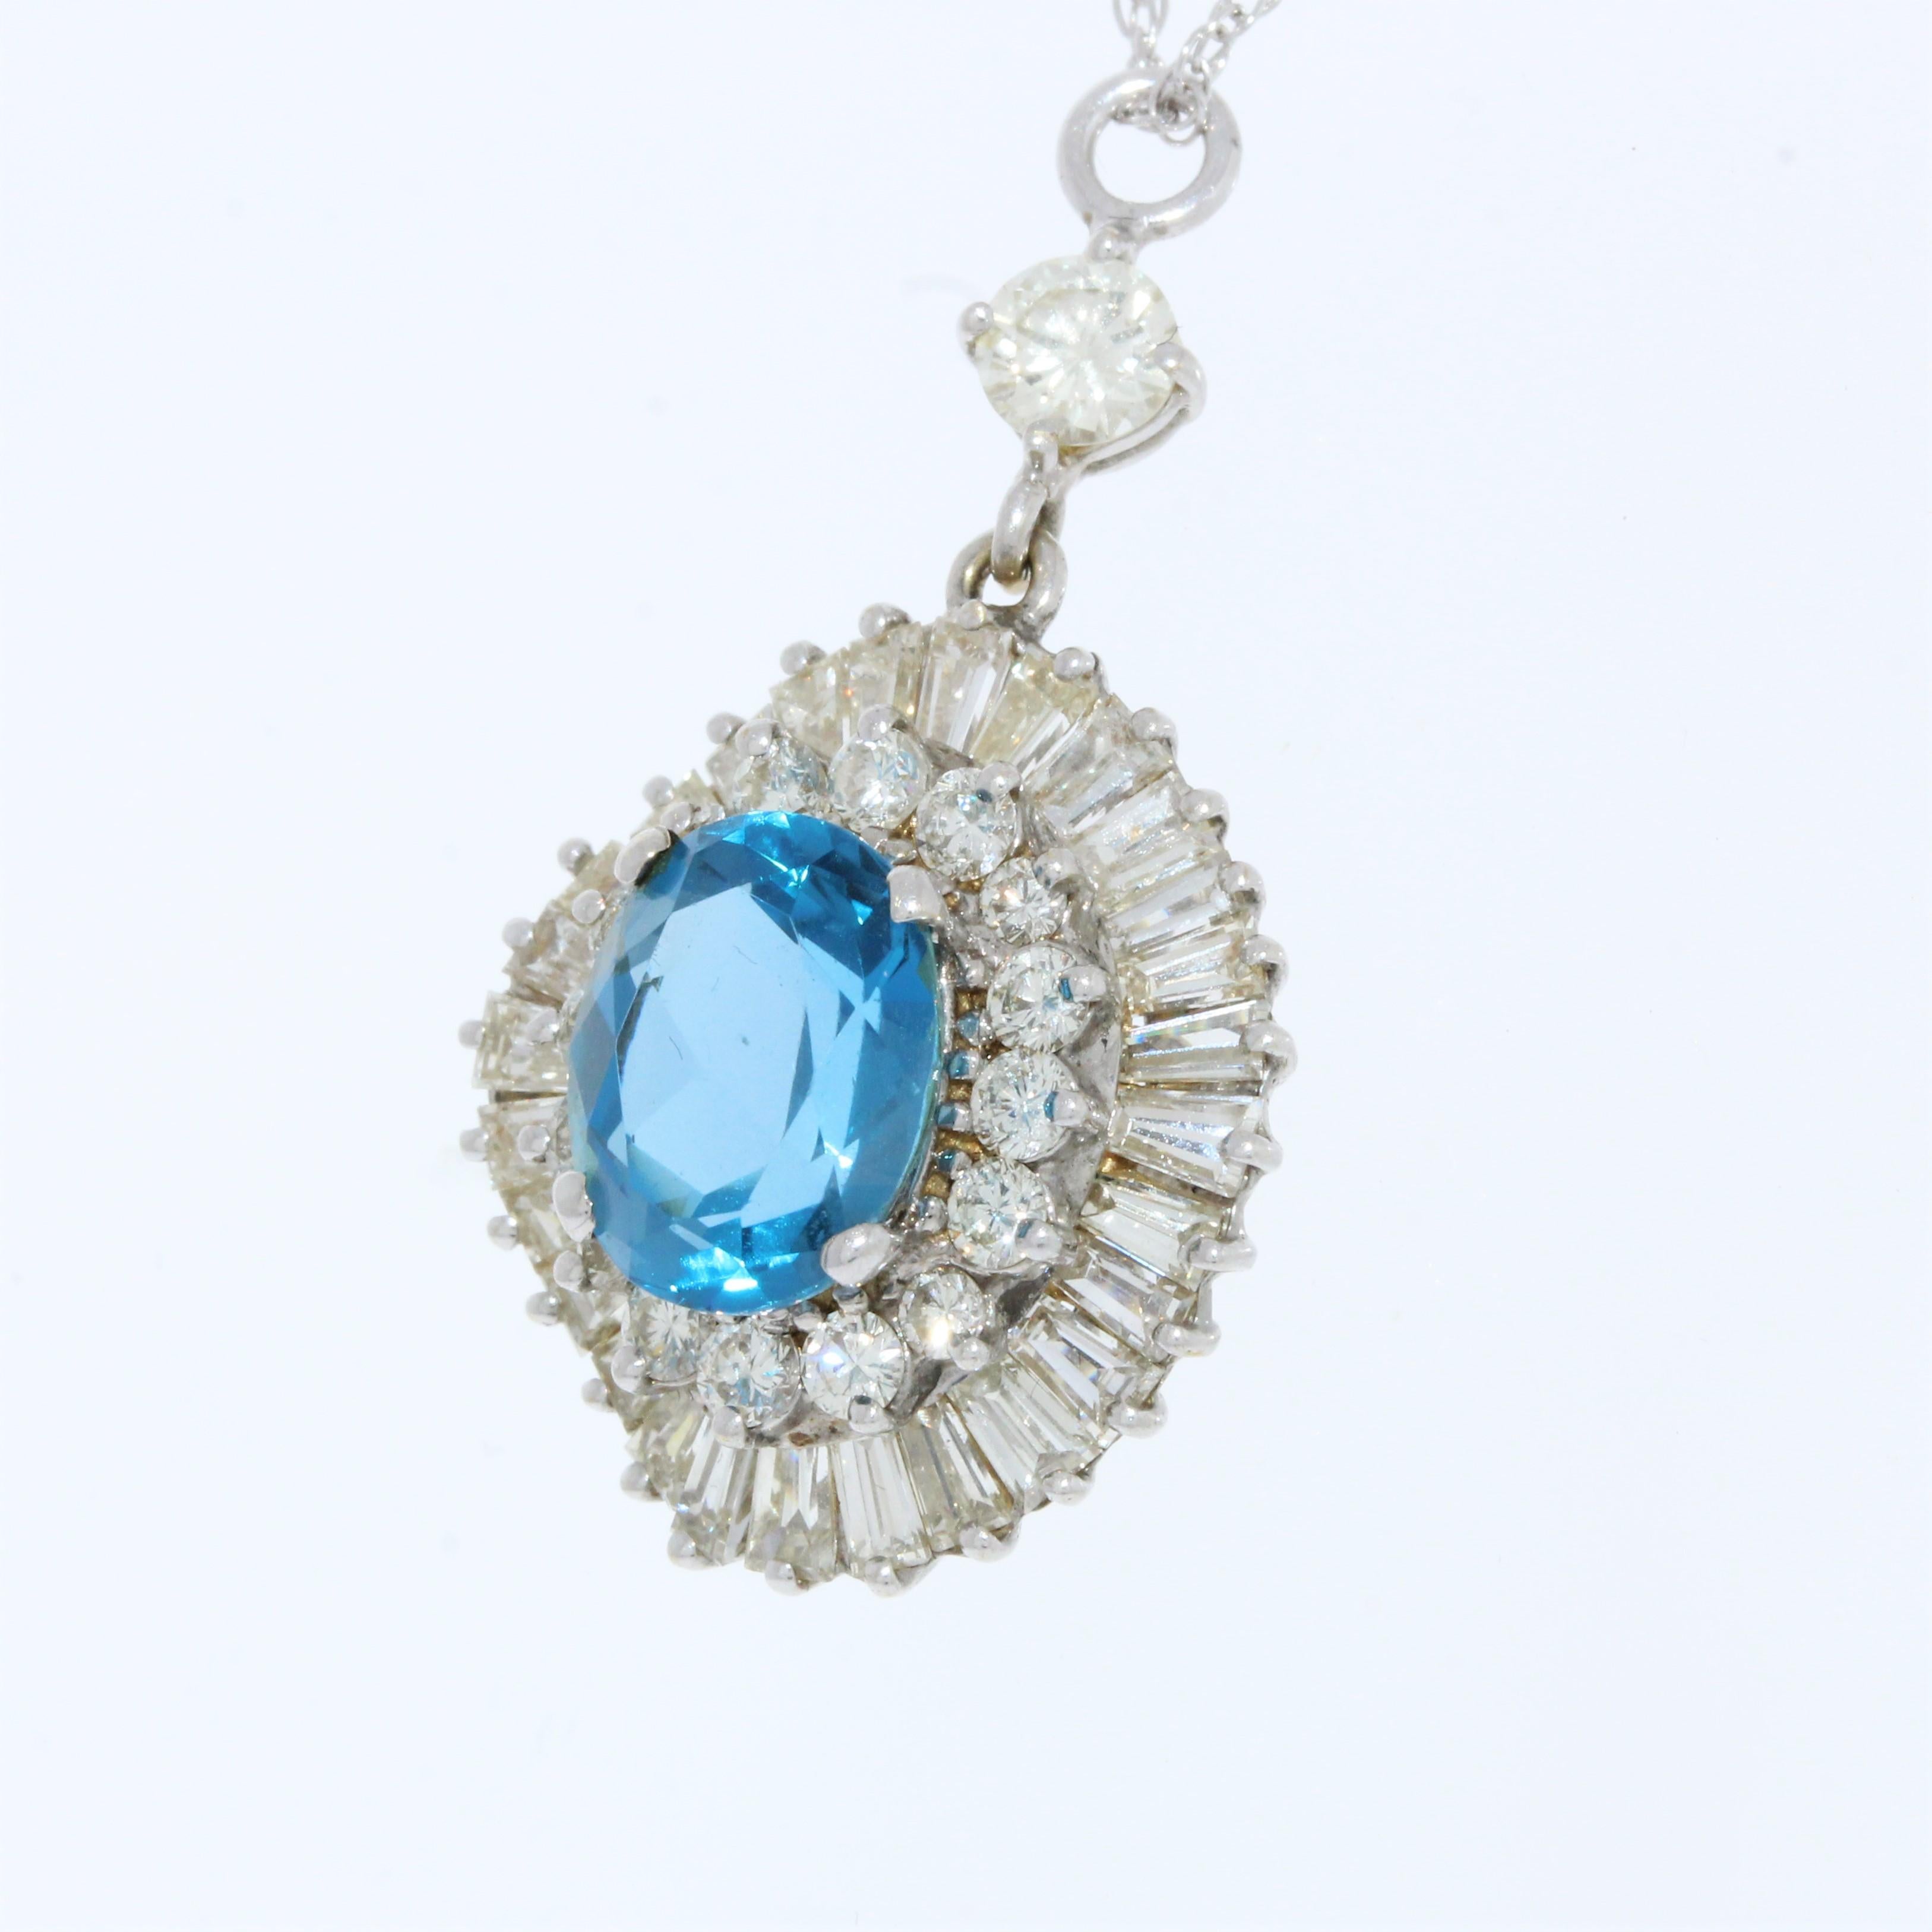 The pendant features a Blue Topaz gemstone set in 14k white gold (14k WG). The gemstone itself is an oval-shaped Blue Topaz, weighing approximately 4.50 carats. Additionally, the pendant includes round-cut diamonds with a quantity of 45.